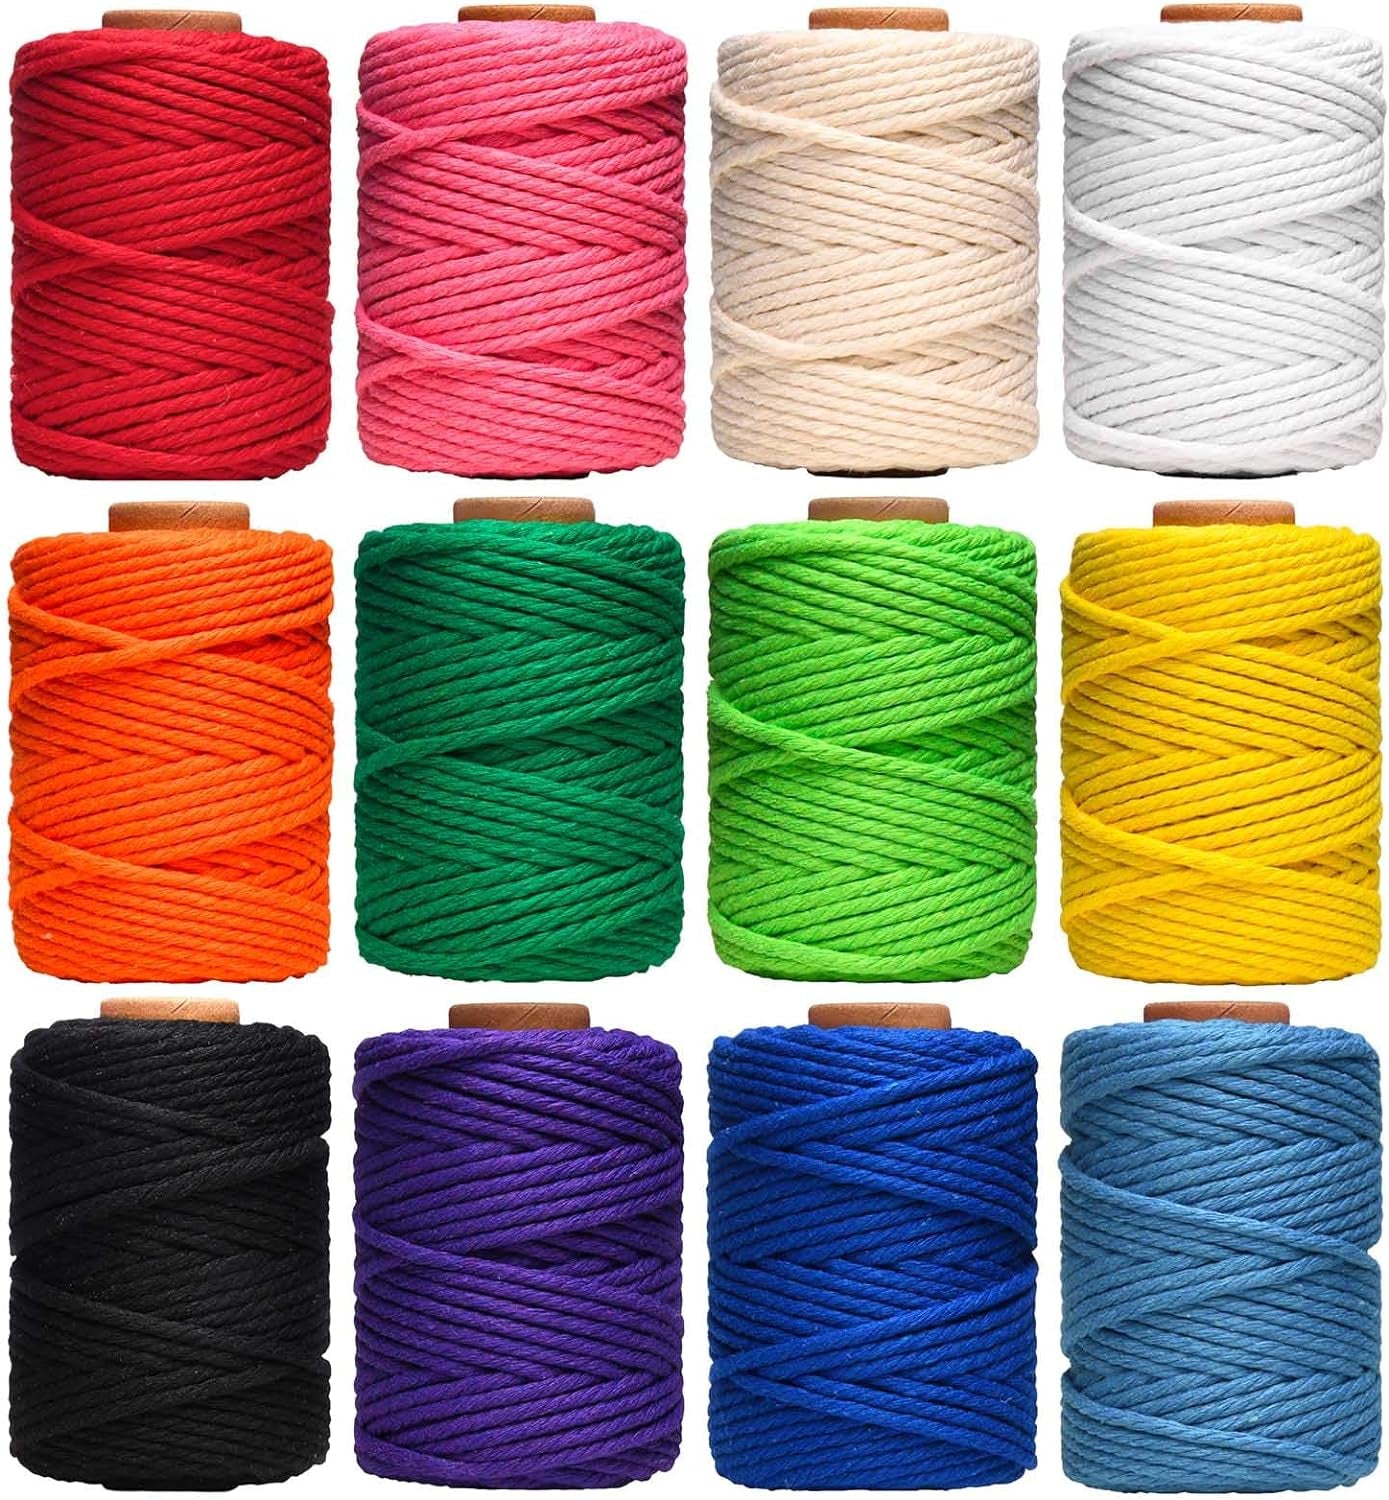 Macrame Cord, 3Mm X 396 Yards Natural Cotton Twine, 12 Rolls 4 Strand Colored Macrame String, Colorful Cotton Rope for DIY Crafts Knitting, Artworks, Wall Hanging, Plant Hangers